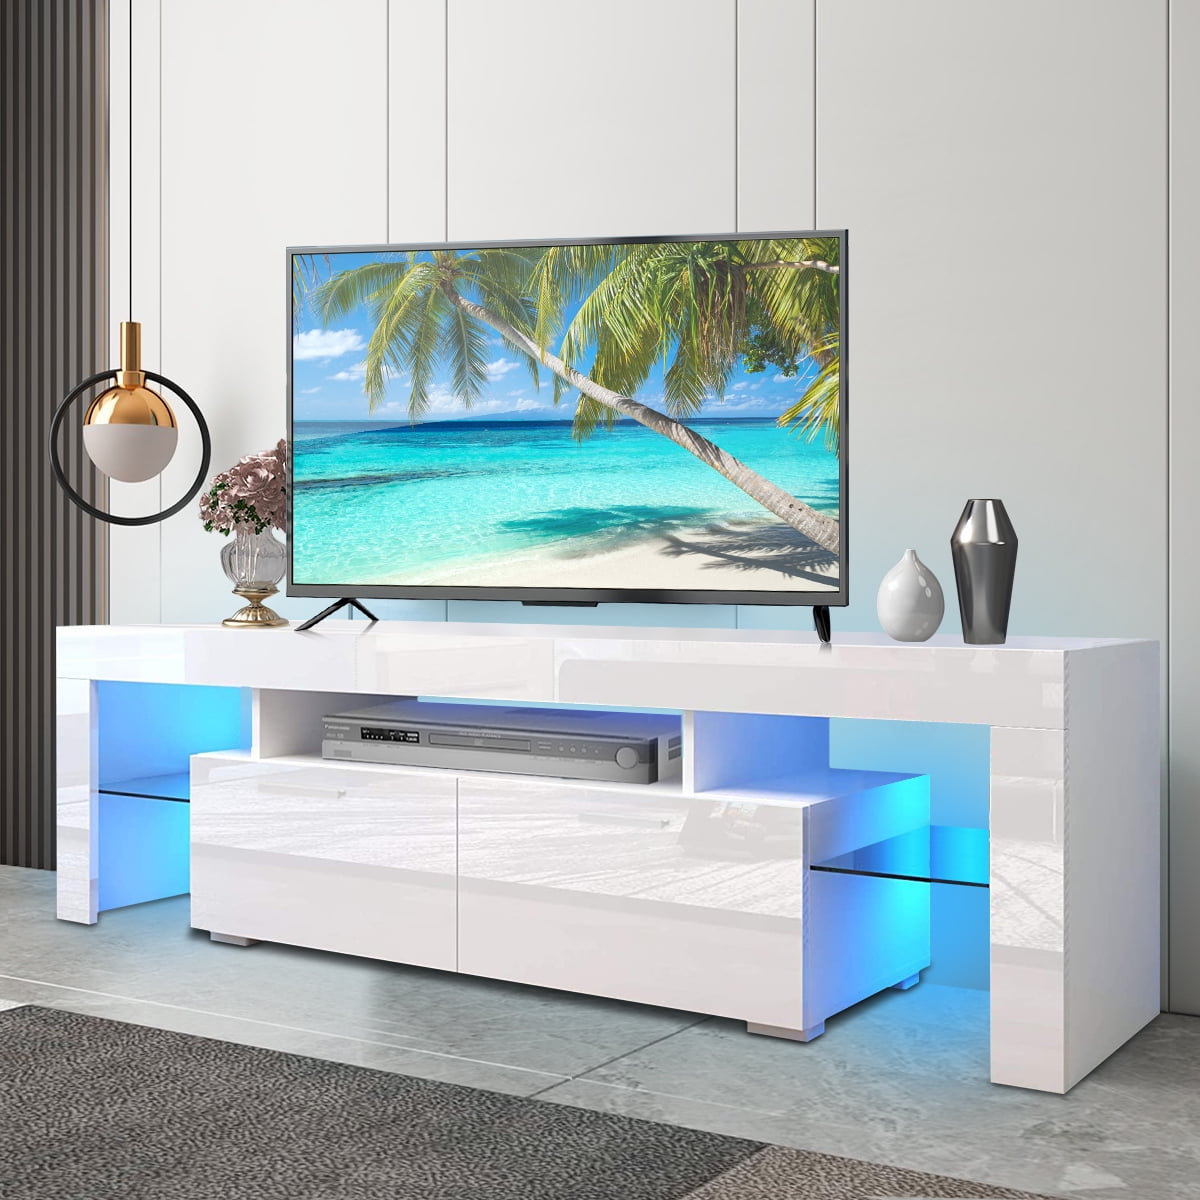 71" High Gloss LED TV Cabinet Stand Entertainment Center Storage Unit 